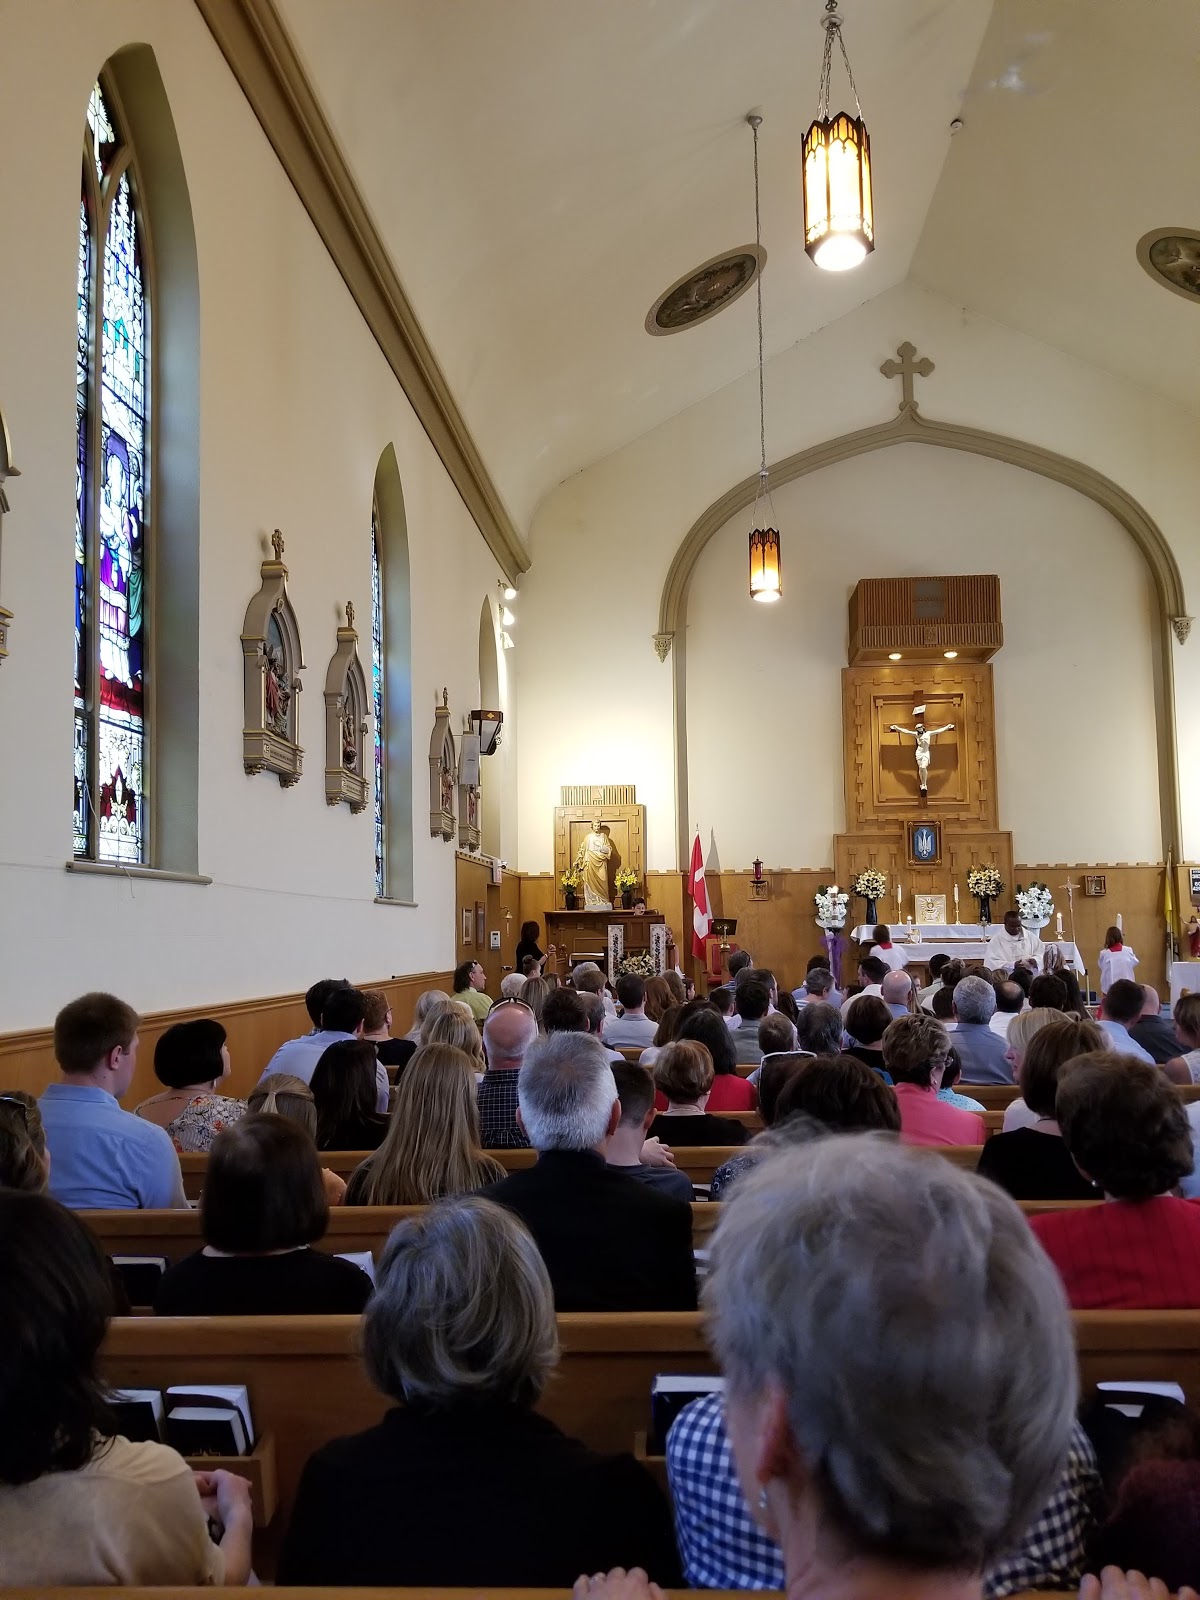 Inside Photo During Liturgy – St. Mary Immaculate